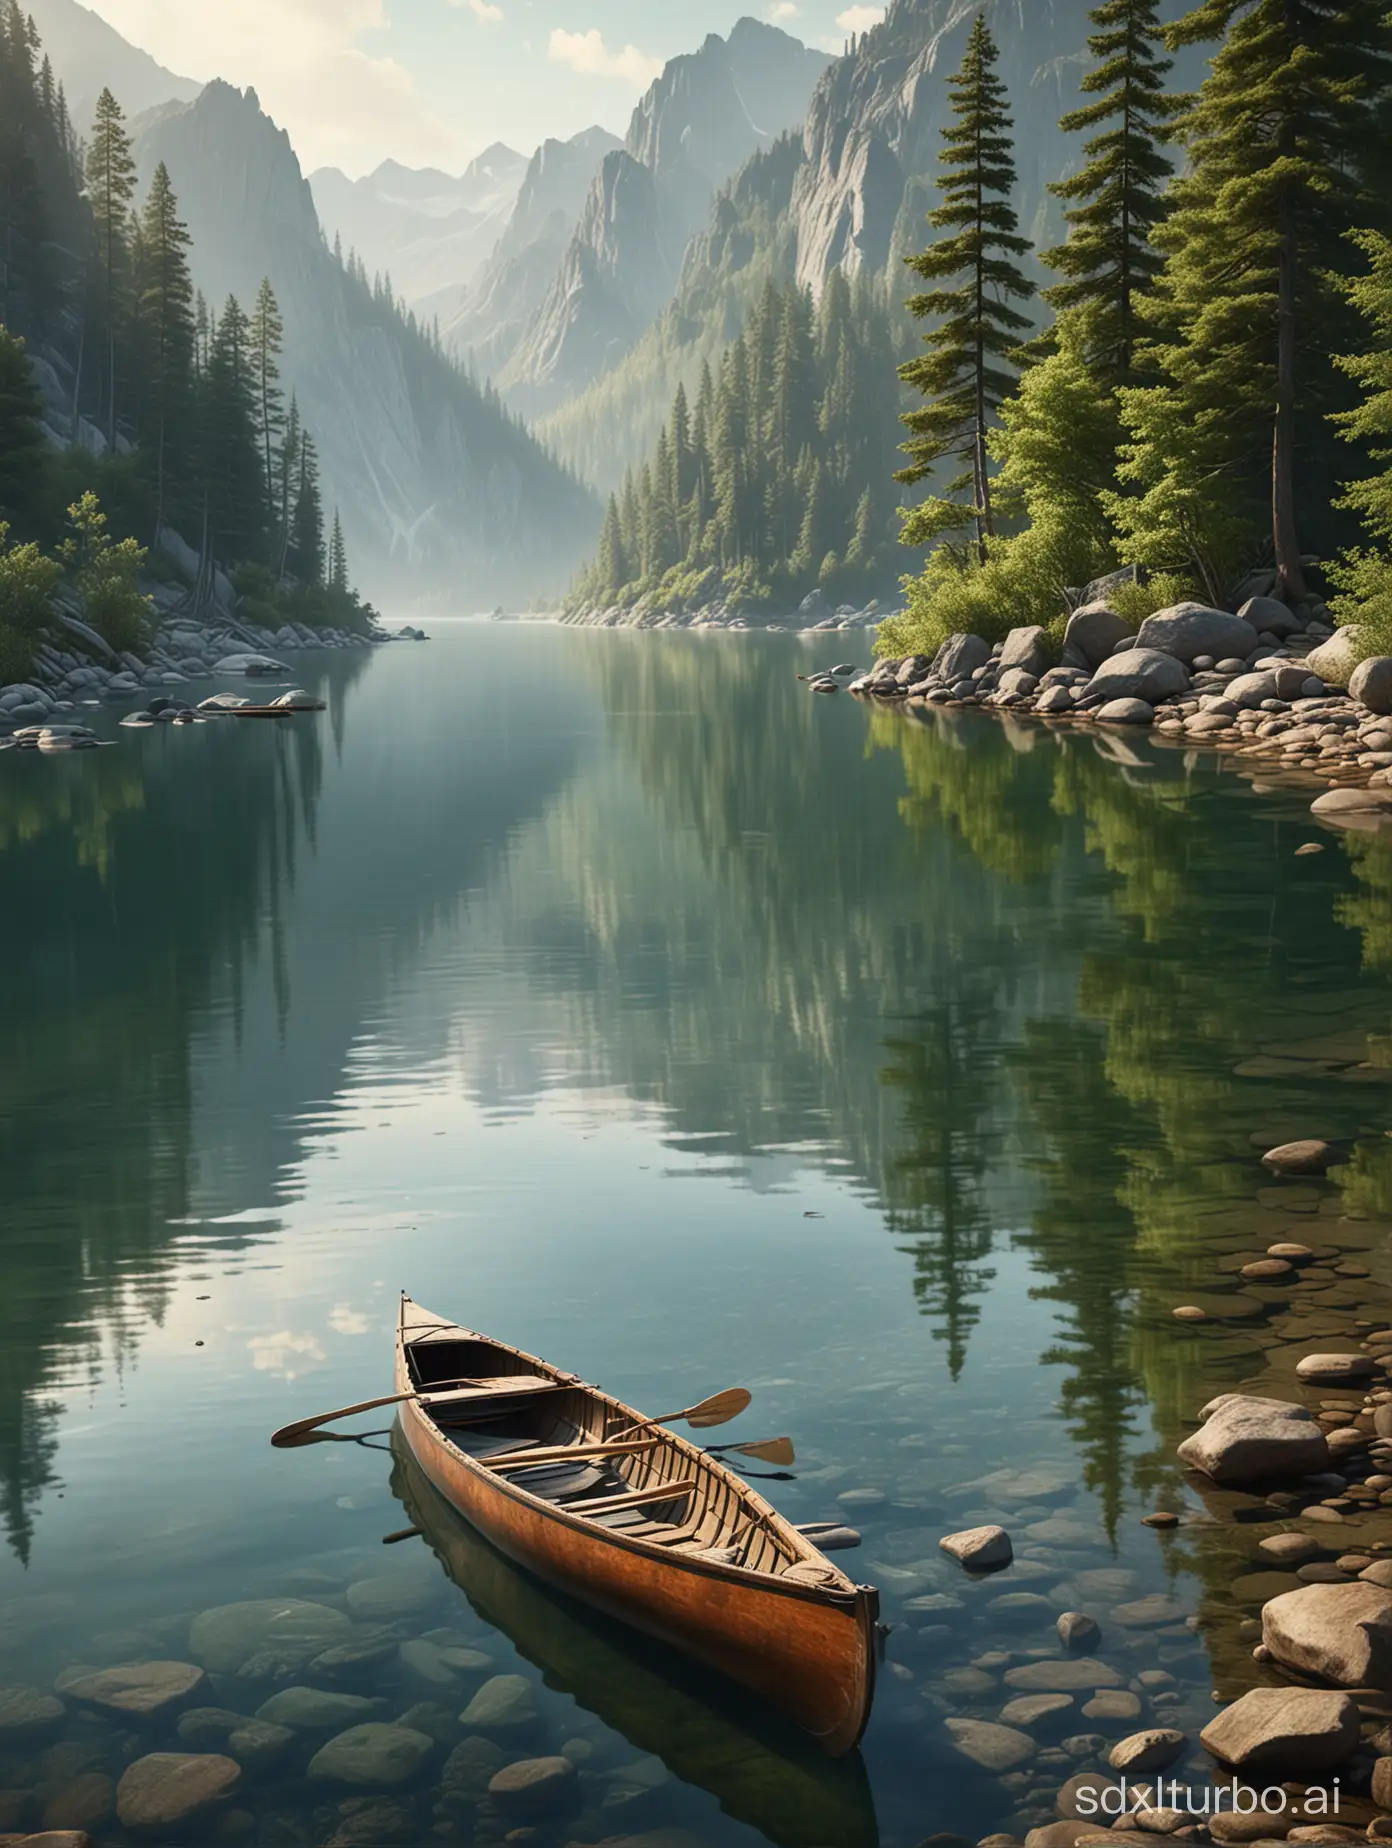 Hyperrealistic-Lake-Painting-with-Old-Canoe-in-Mountain-Setting